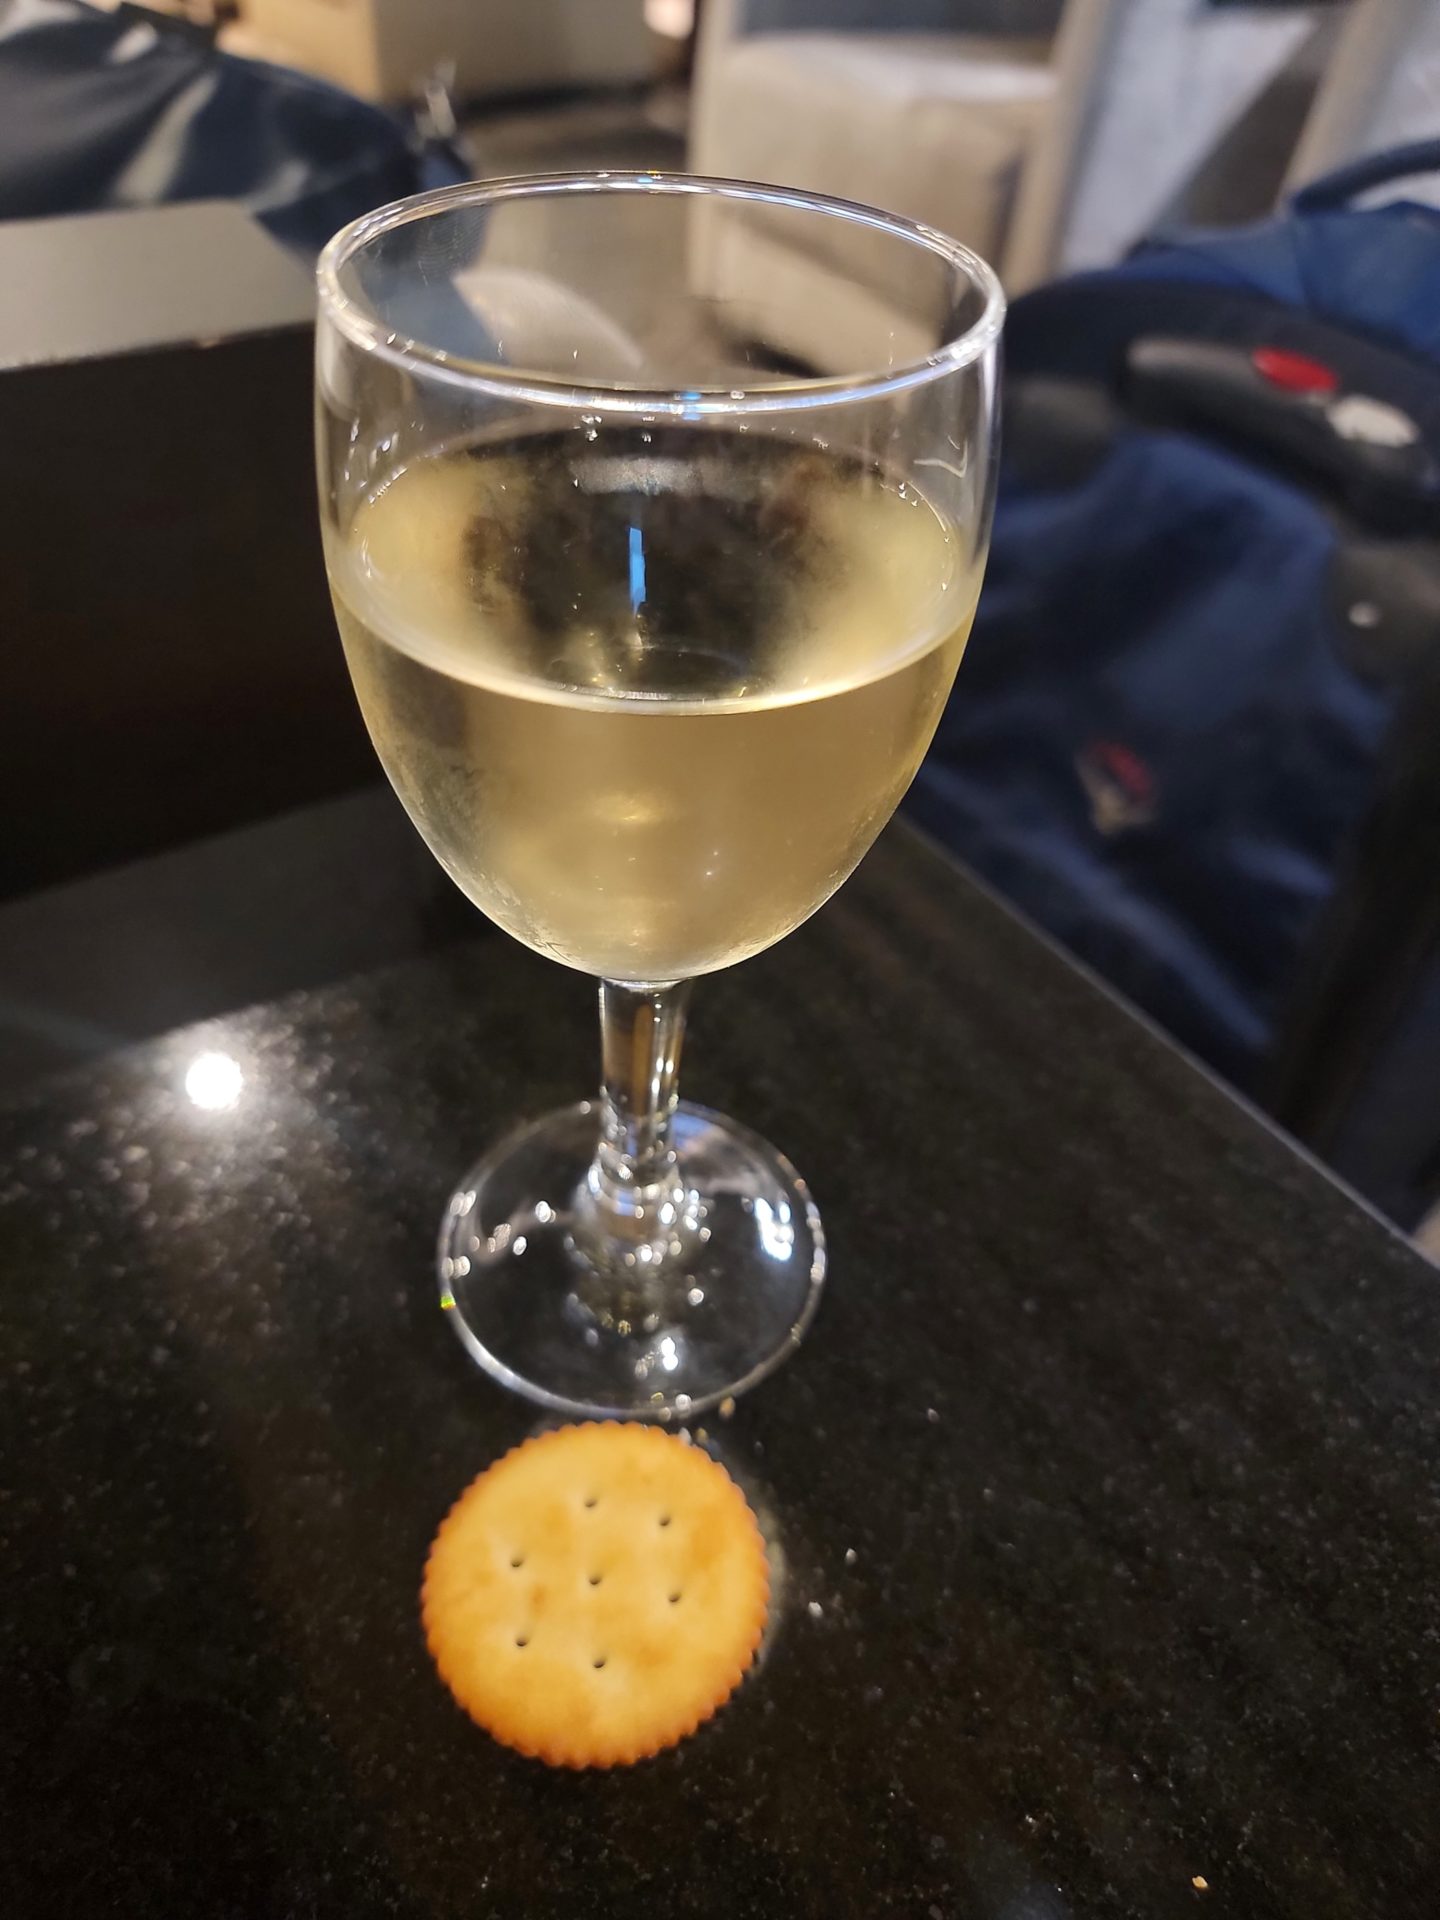 a glass of wine and a cracker on a table